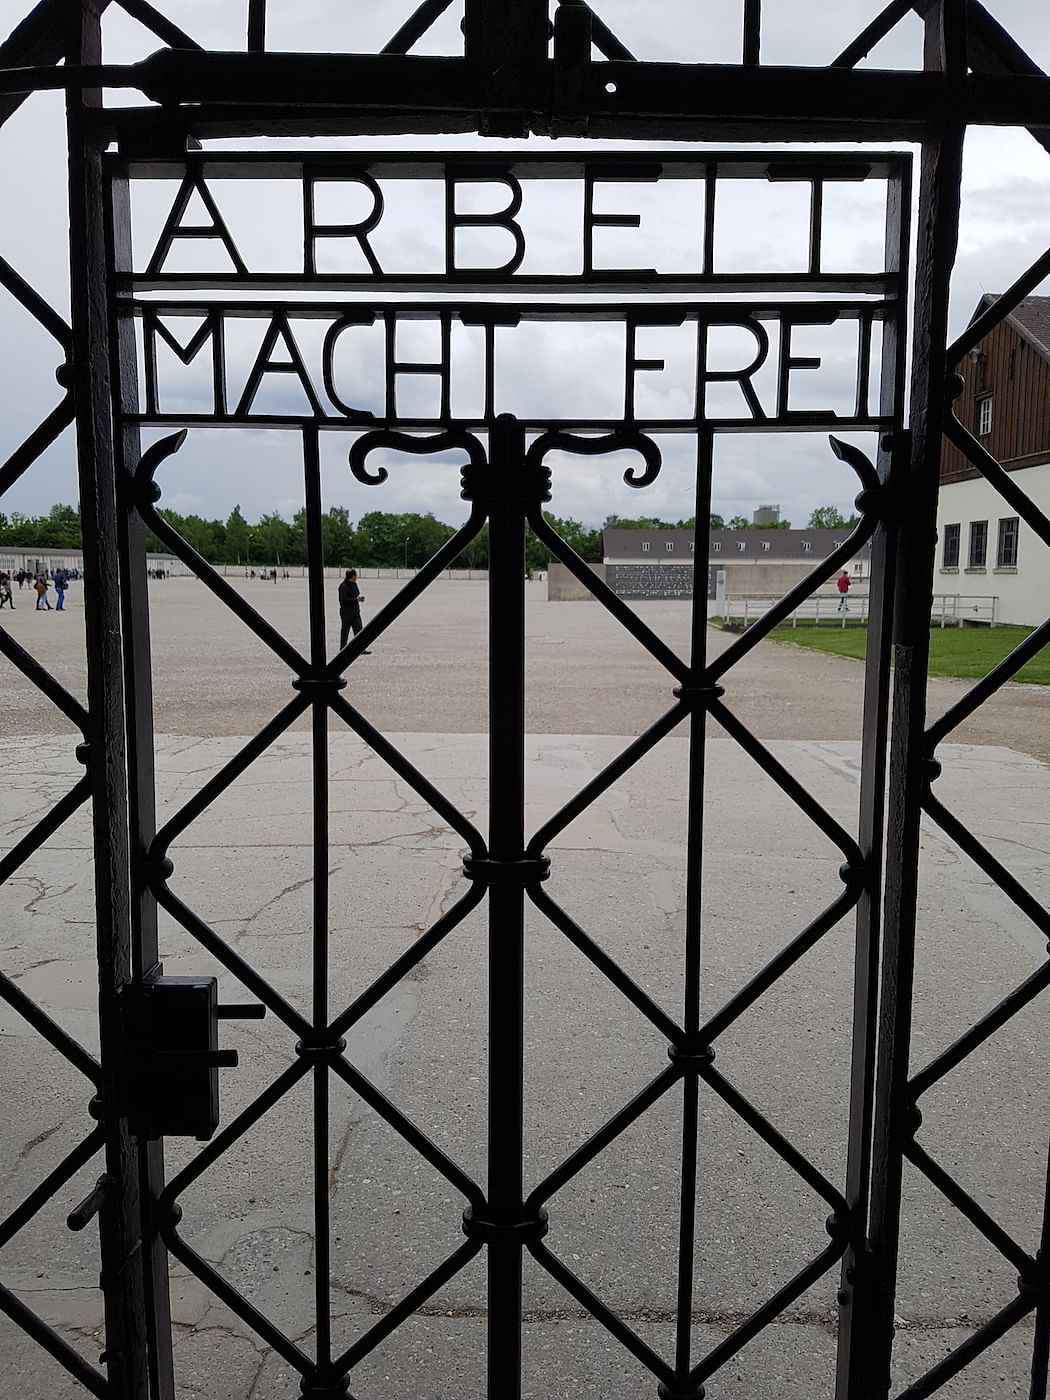 I left Dachau with moist eyes – the place serving as a reminder that persecution is unacceptable and horrifying.